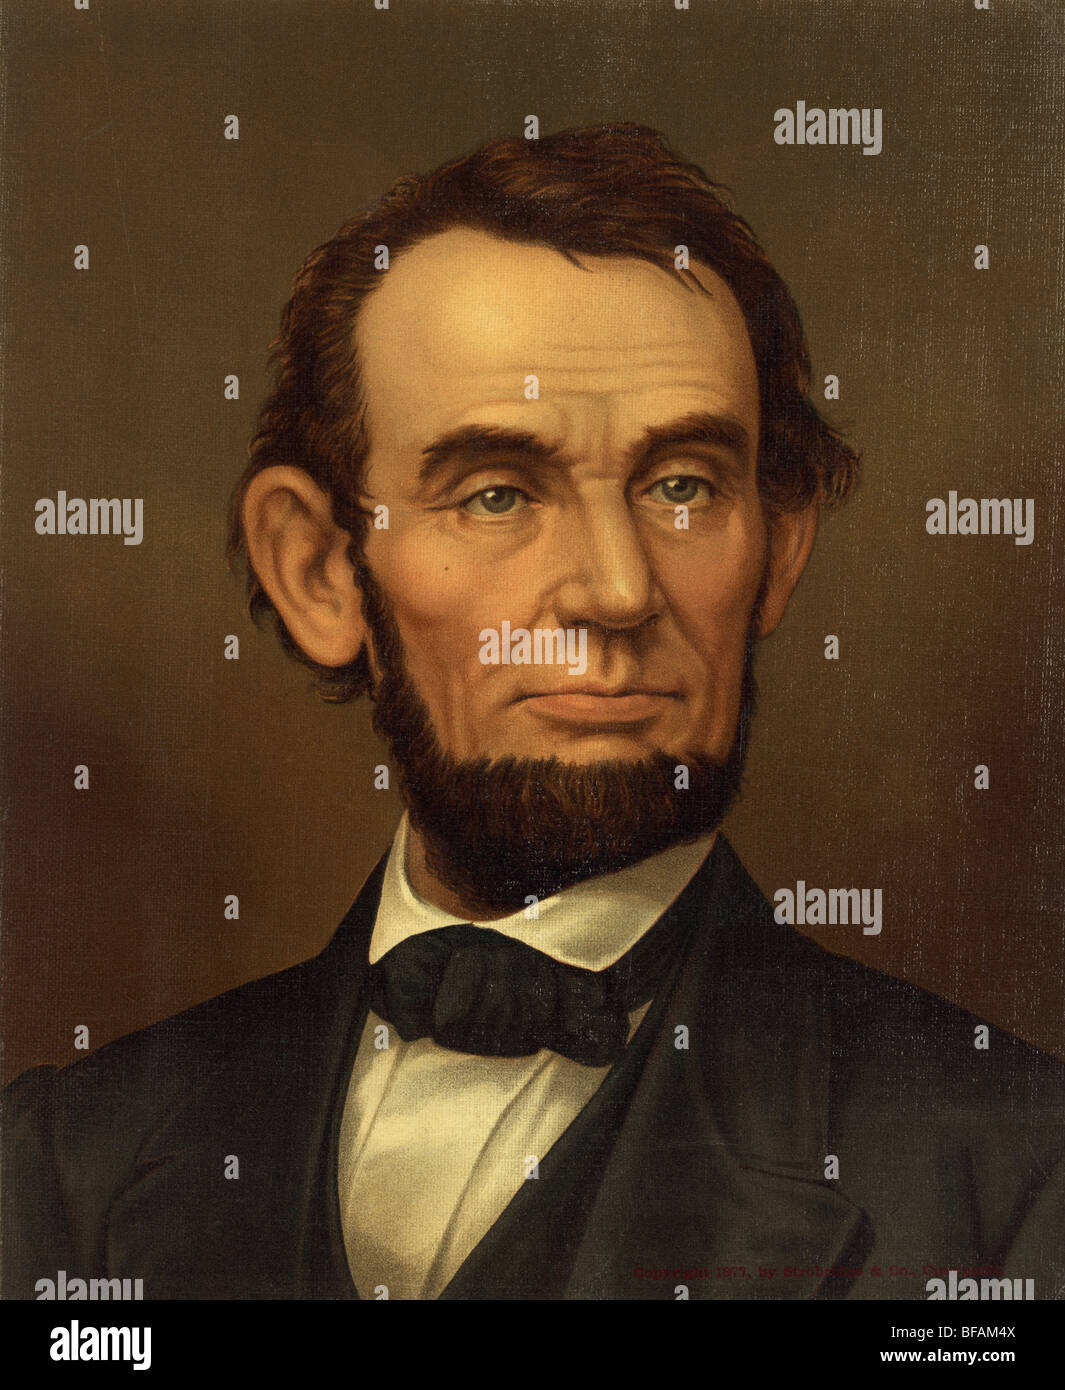 Portrait c1877 of Abraham Lincoln - Lincoln (1809 - 1865) was the 16th US President (1861 - 1865) and first to be assassinated. Stock Photo